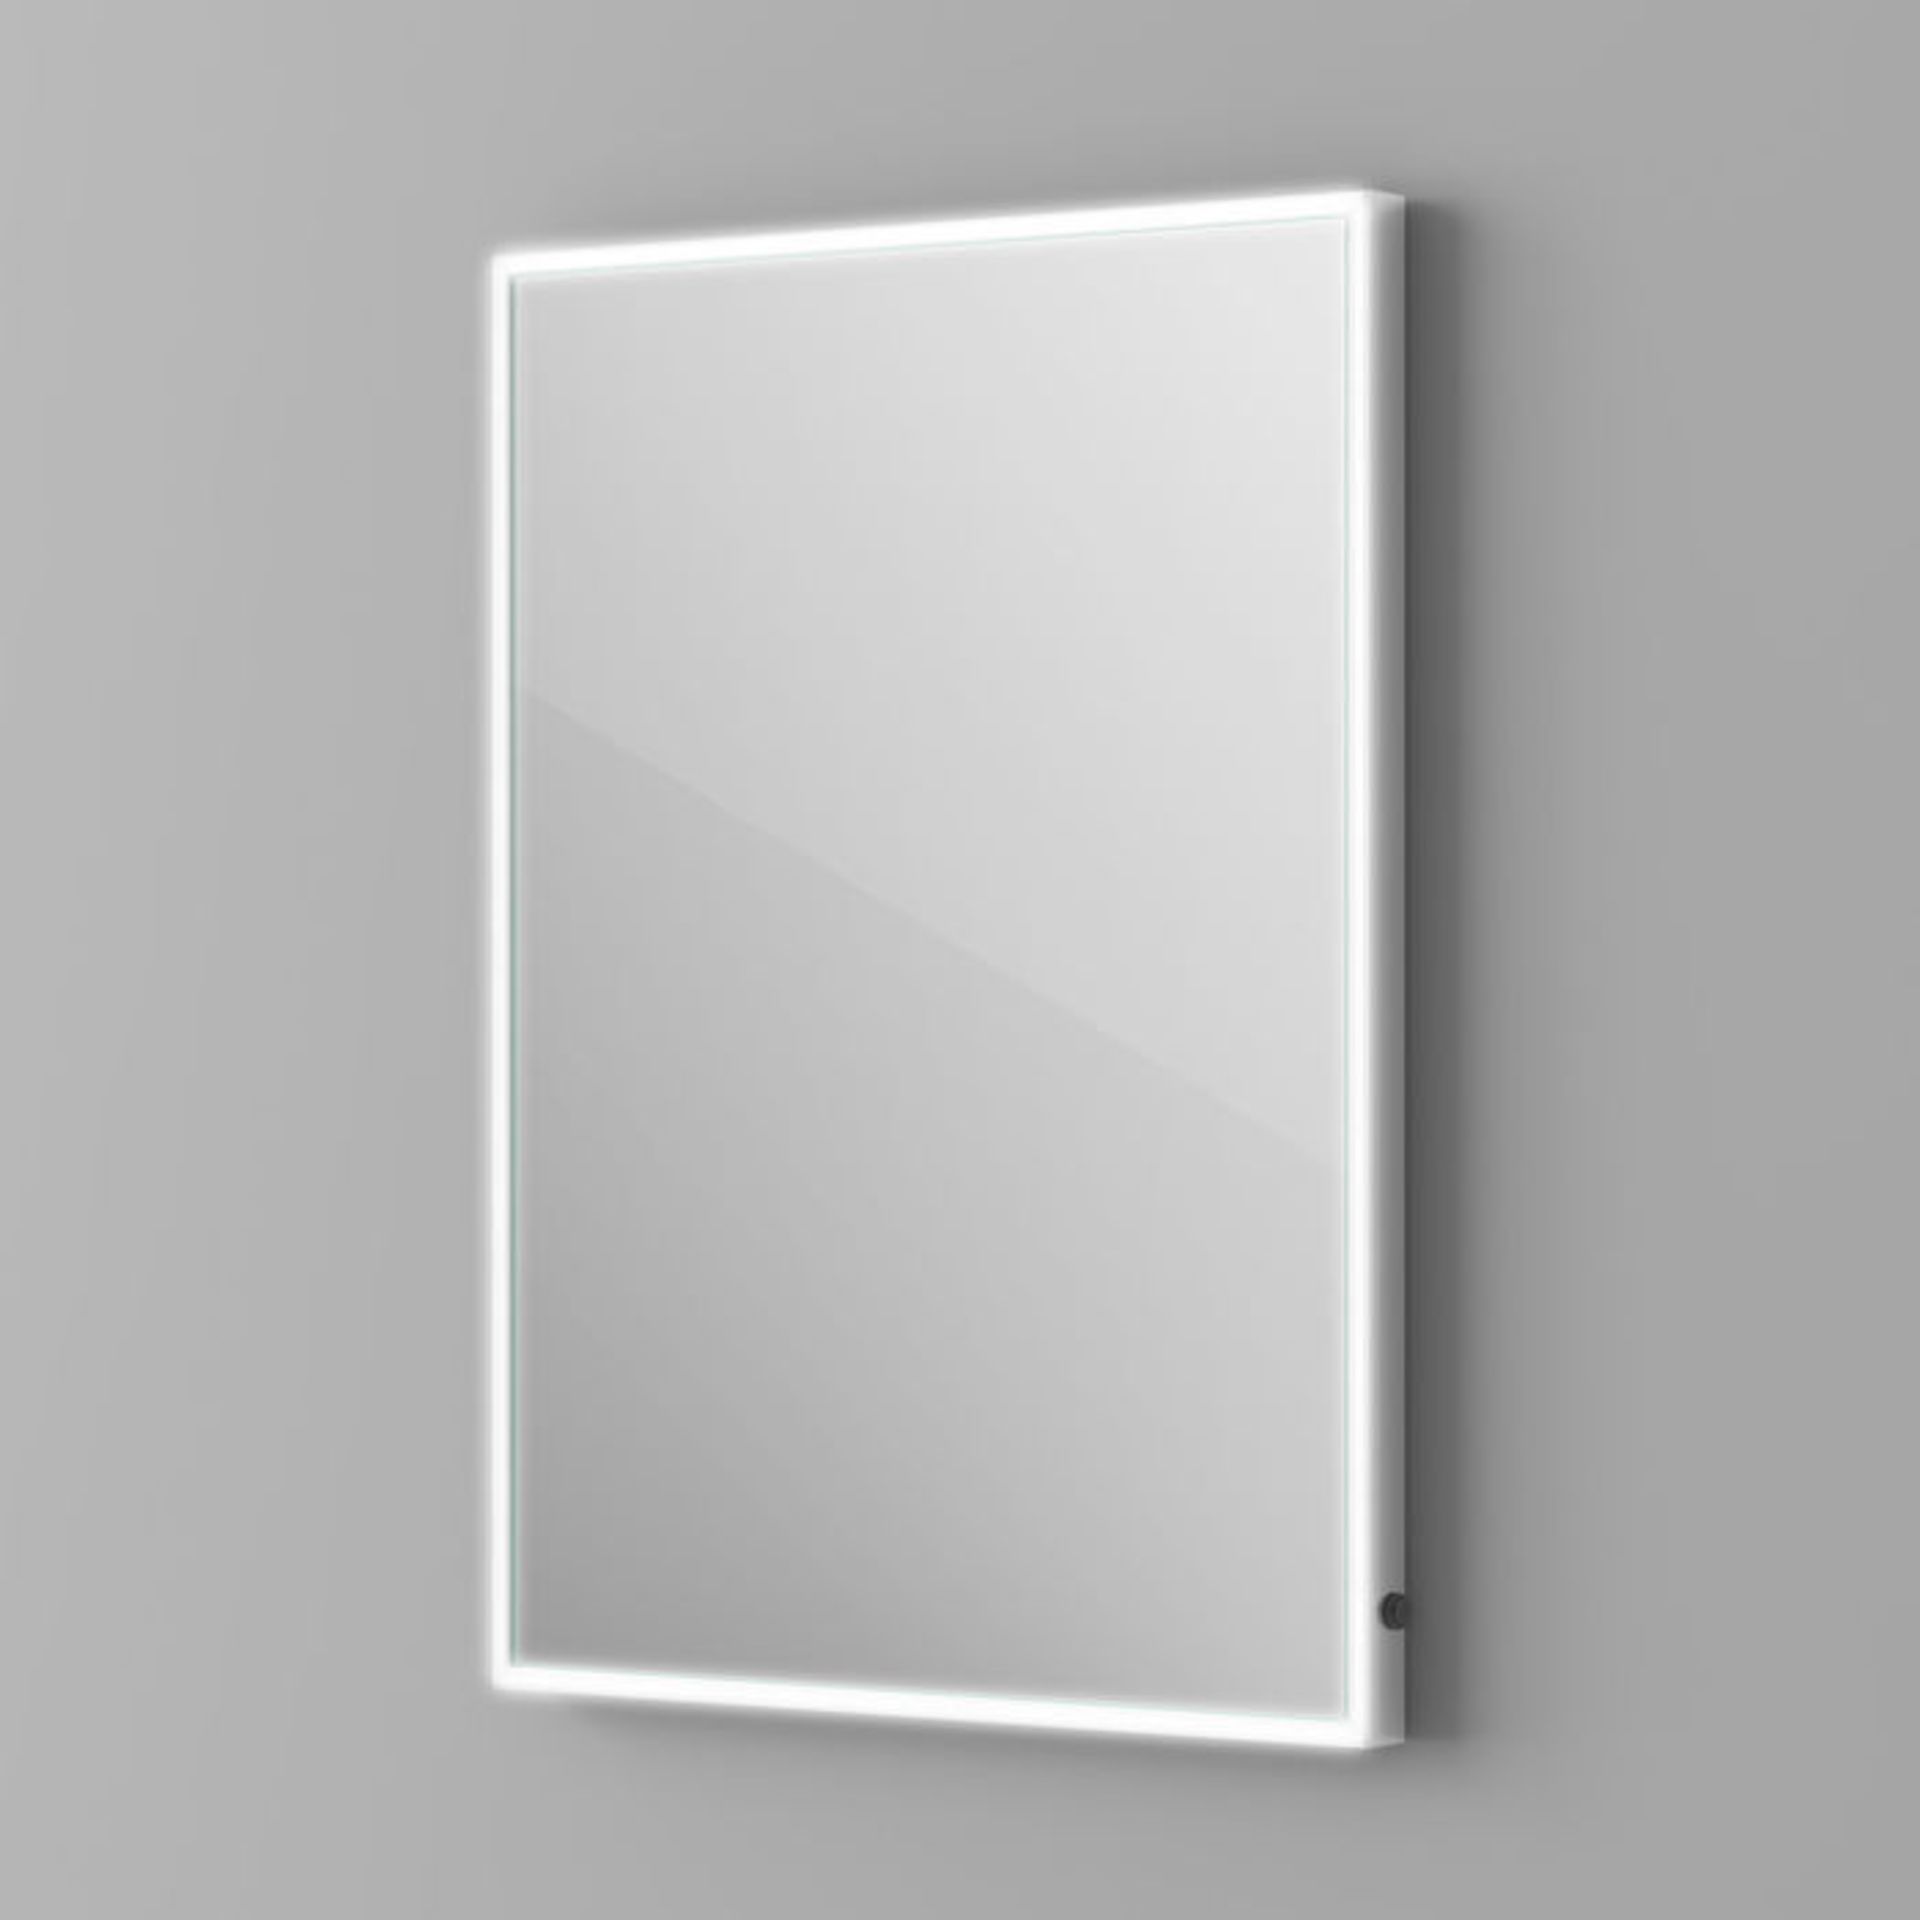 (SA27) 500x700mm Cosmic Illuminated LED Mirror. RRP £532.99. Energy efficient LED lighting with IP44 - Image 6 of 6